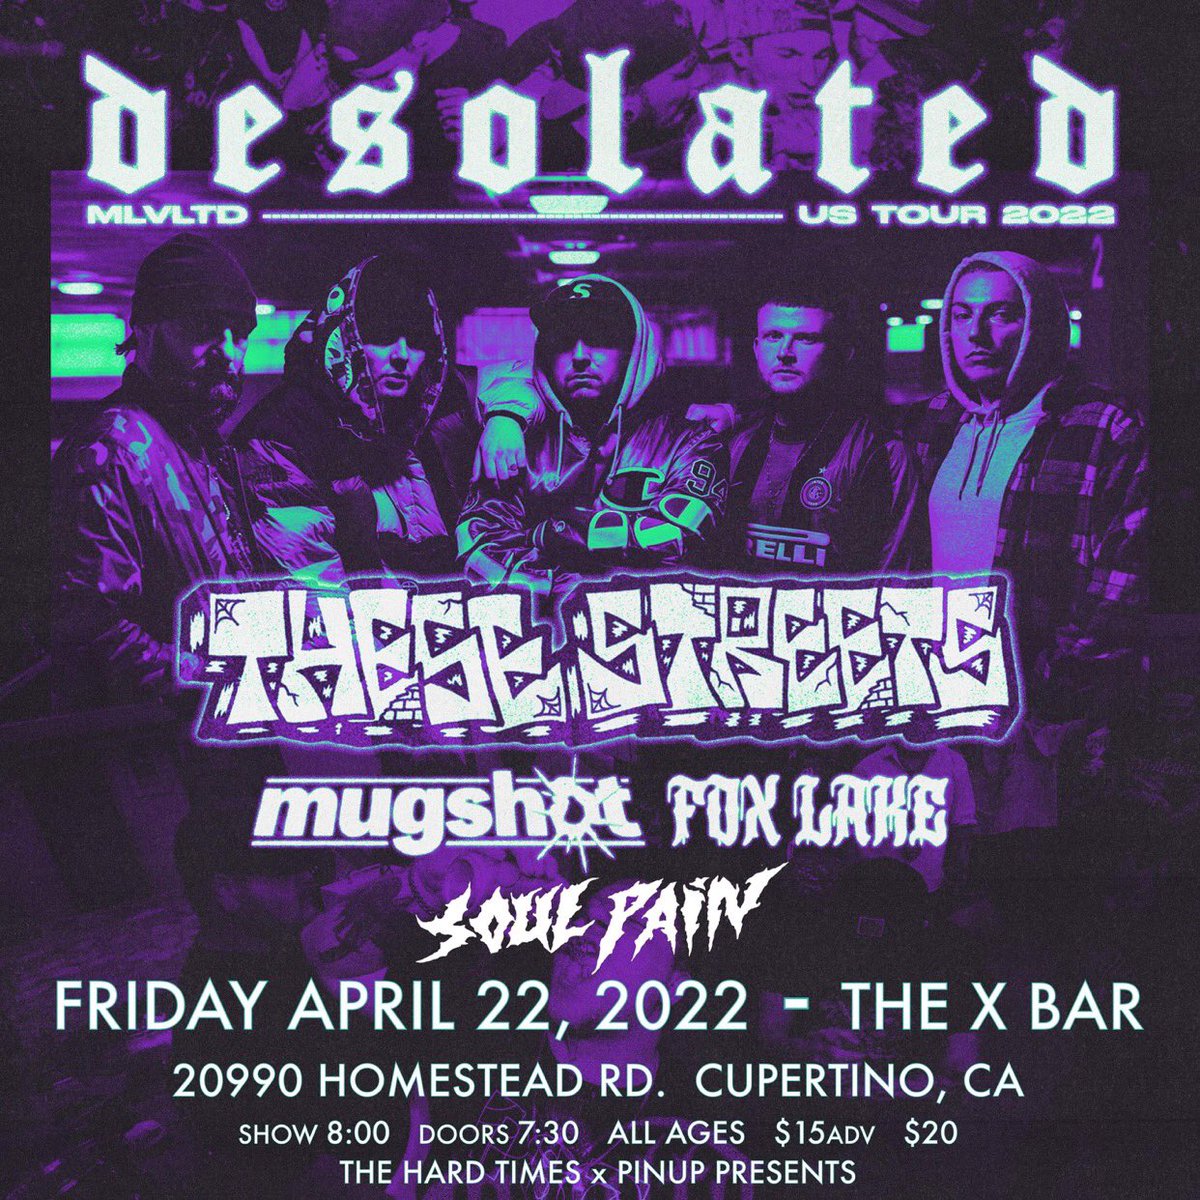 ONE MONTH AWAY!!!
Friday April 22, 2022
DESOLATED 
THESE STREETS 
MUGSHOT
FOX LAKE
@SoulPainCA 
@ THE X BAR Cupertino, CA
Tickets: https://t.co/T6i5Ph0XeD https://t.co/ocF7M8K41r